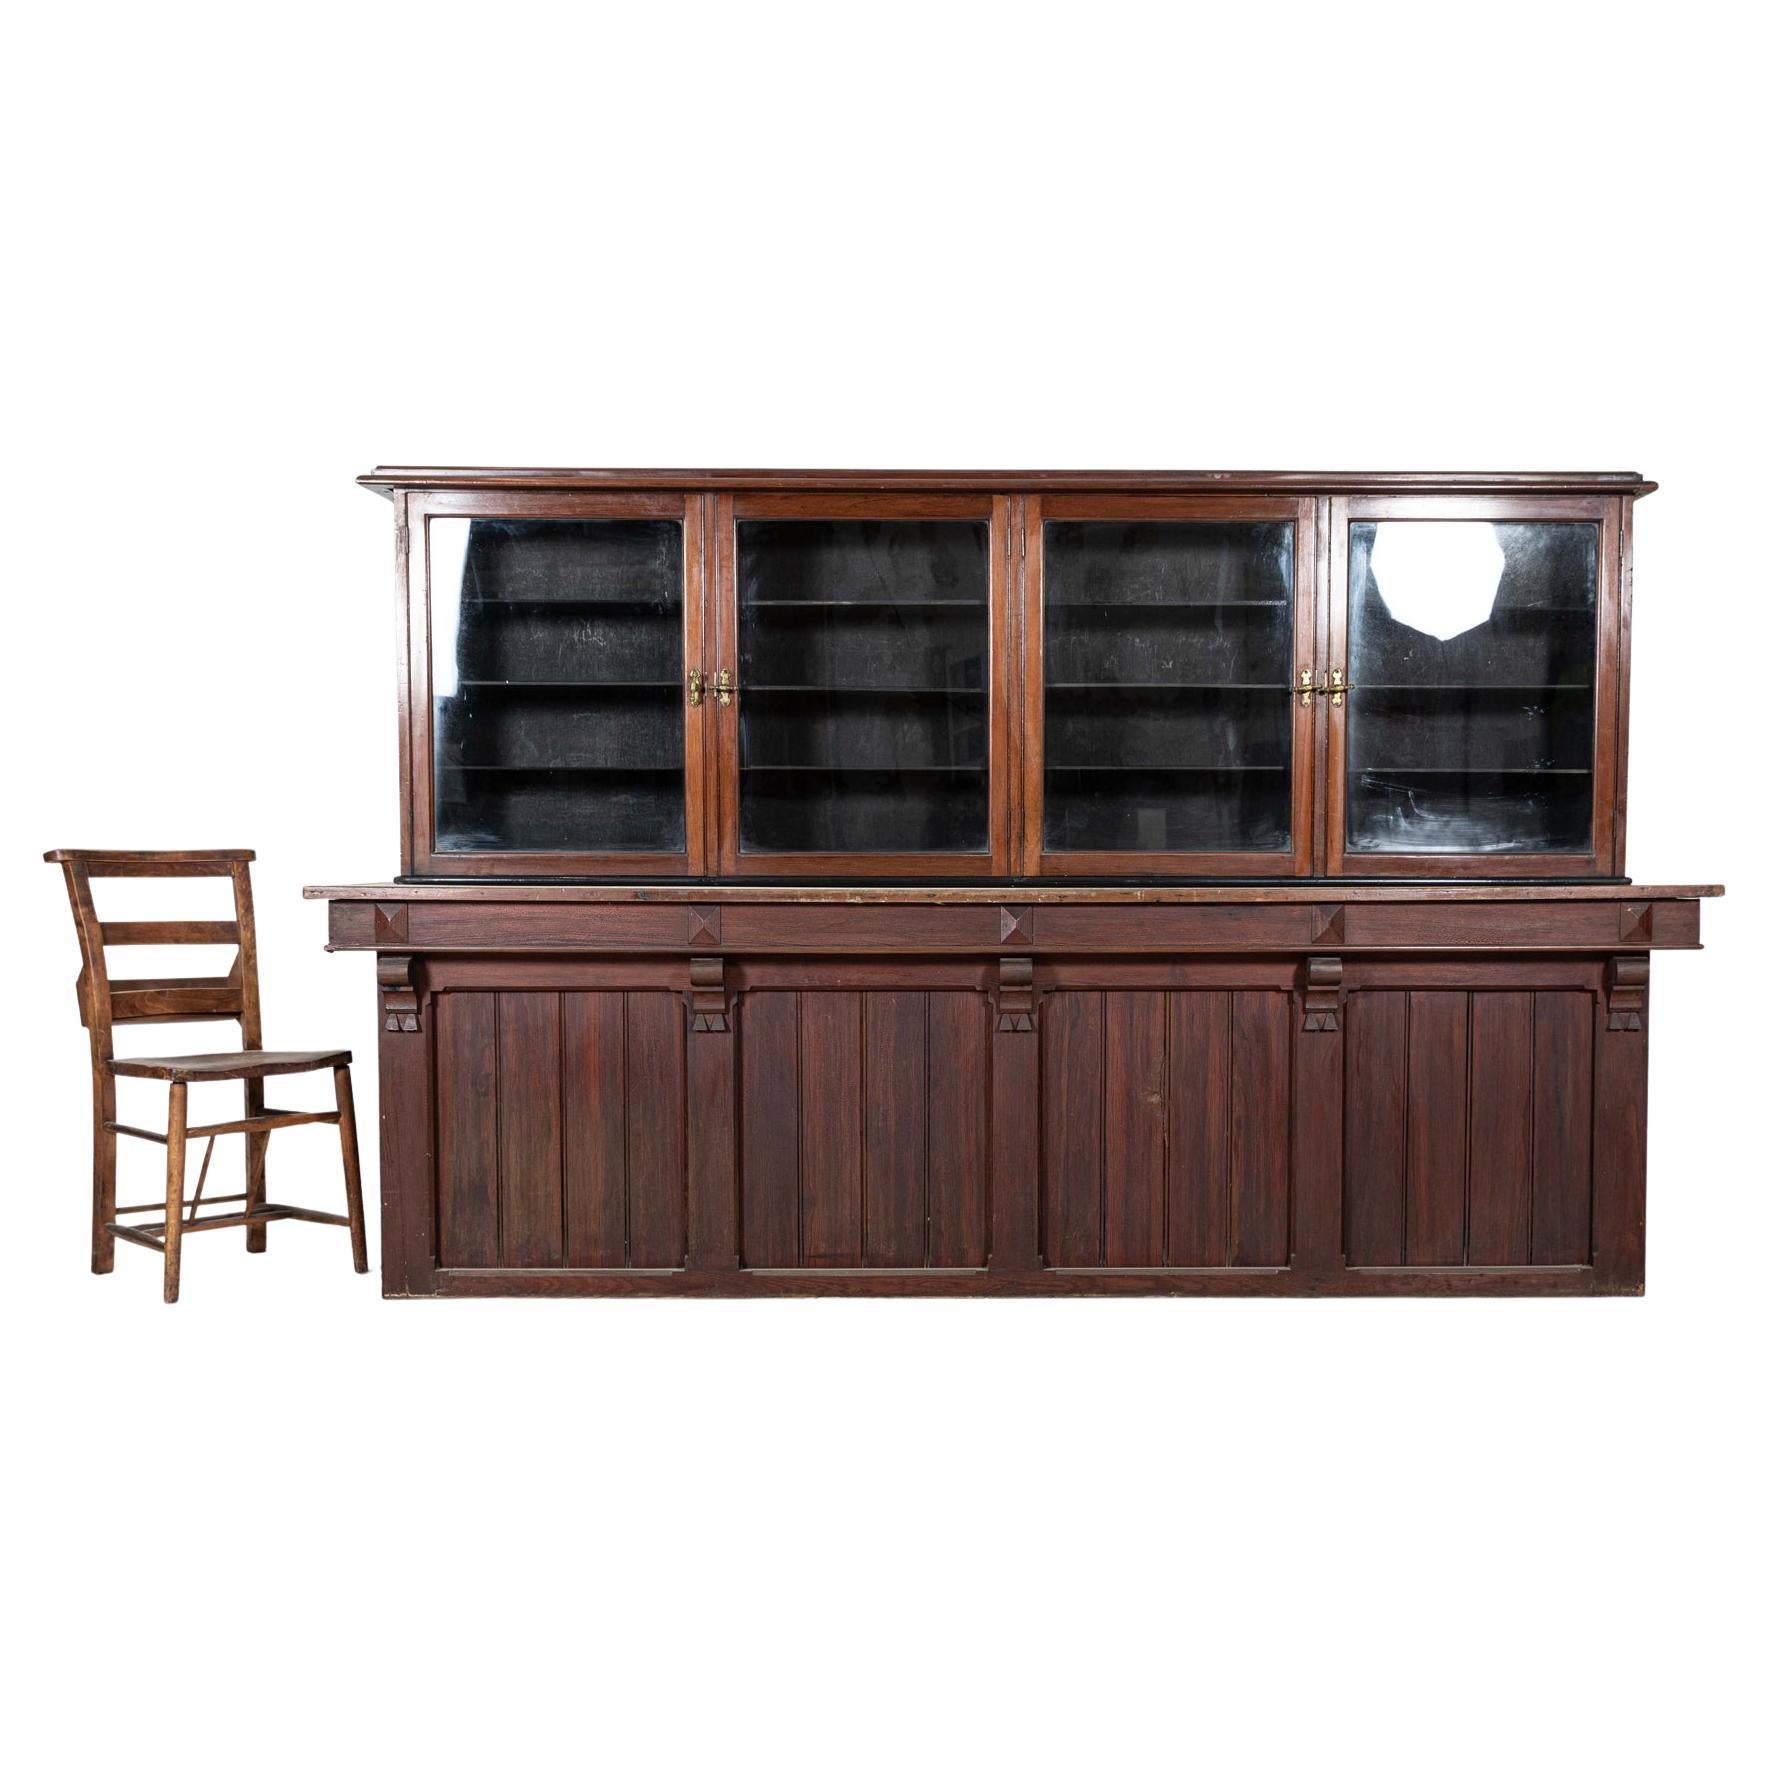 Large 19thC English Mahogany Glazed Apothecary Wall Cabinet For Sale